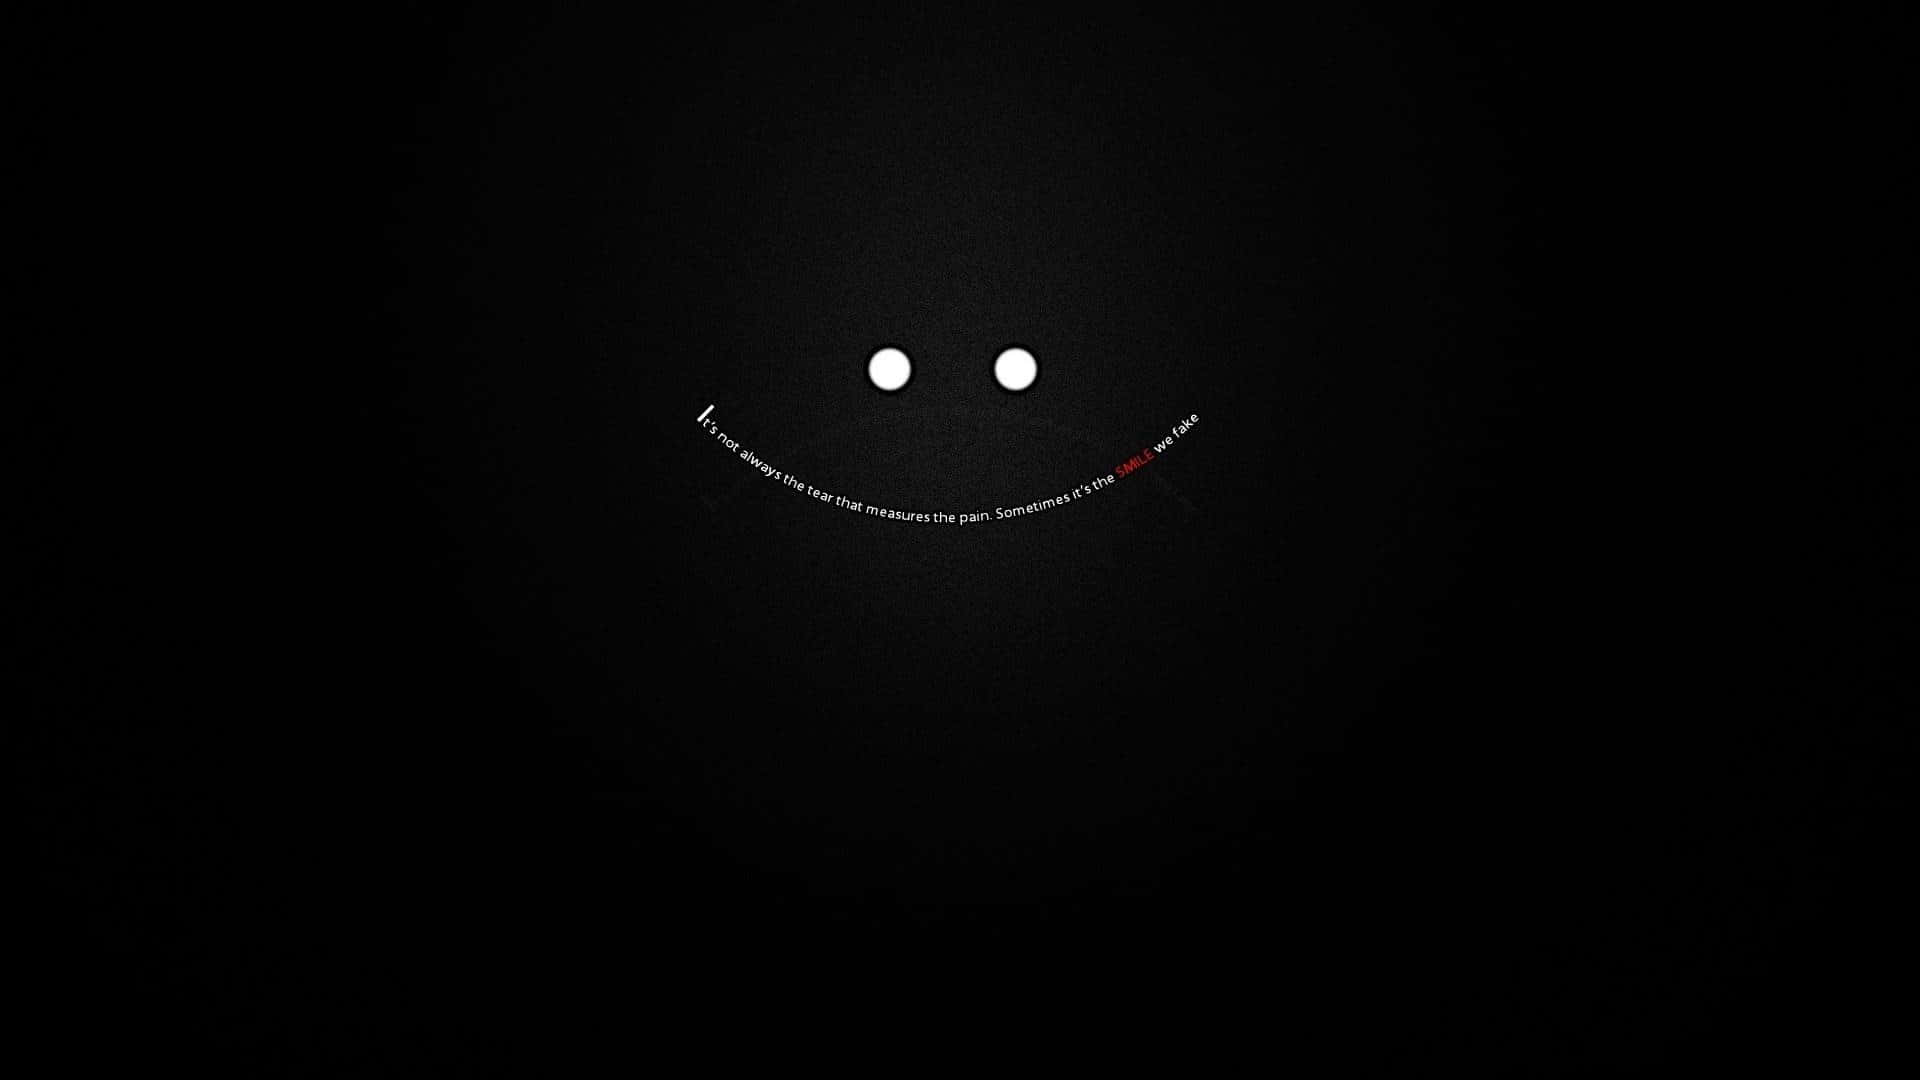 The Power of a Black Smile Wallpaper